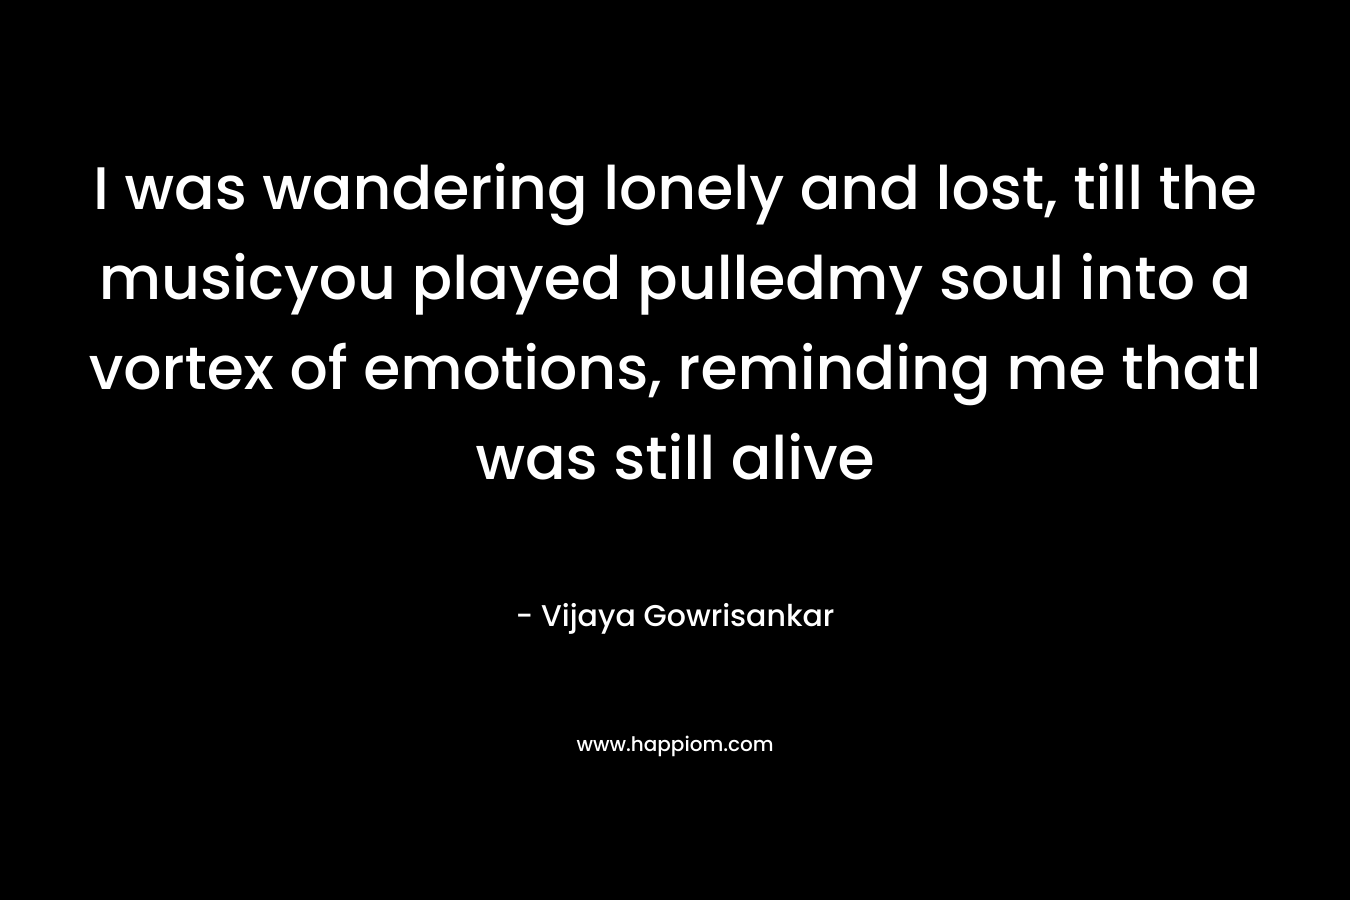 I was wandering lonely and lost, till the musicyou played pulledmy soul into a vortex of emotions, reminding me thatI was still alive – Vijaya Gowrisankar